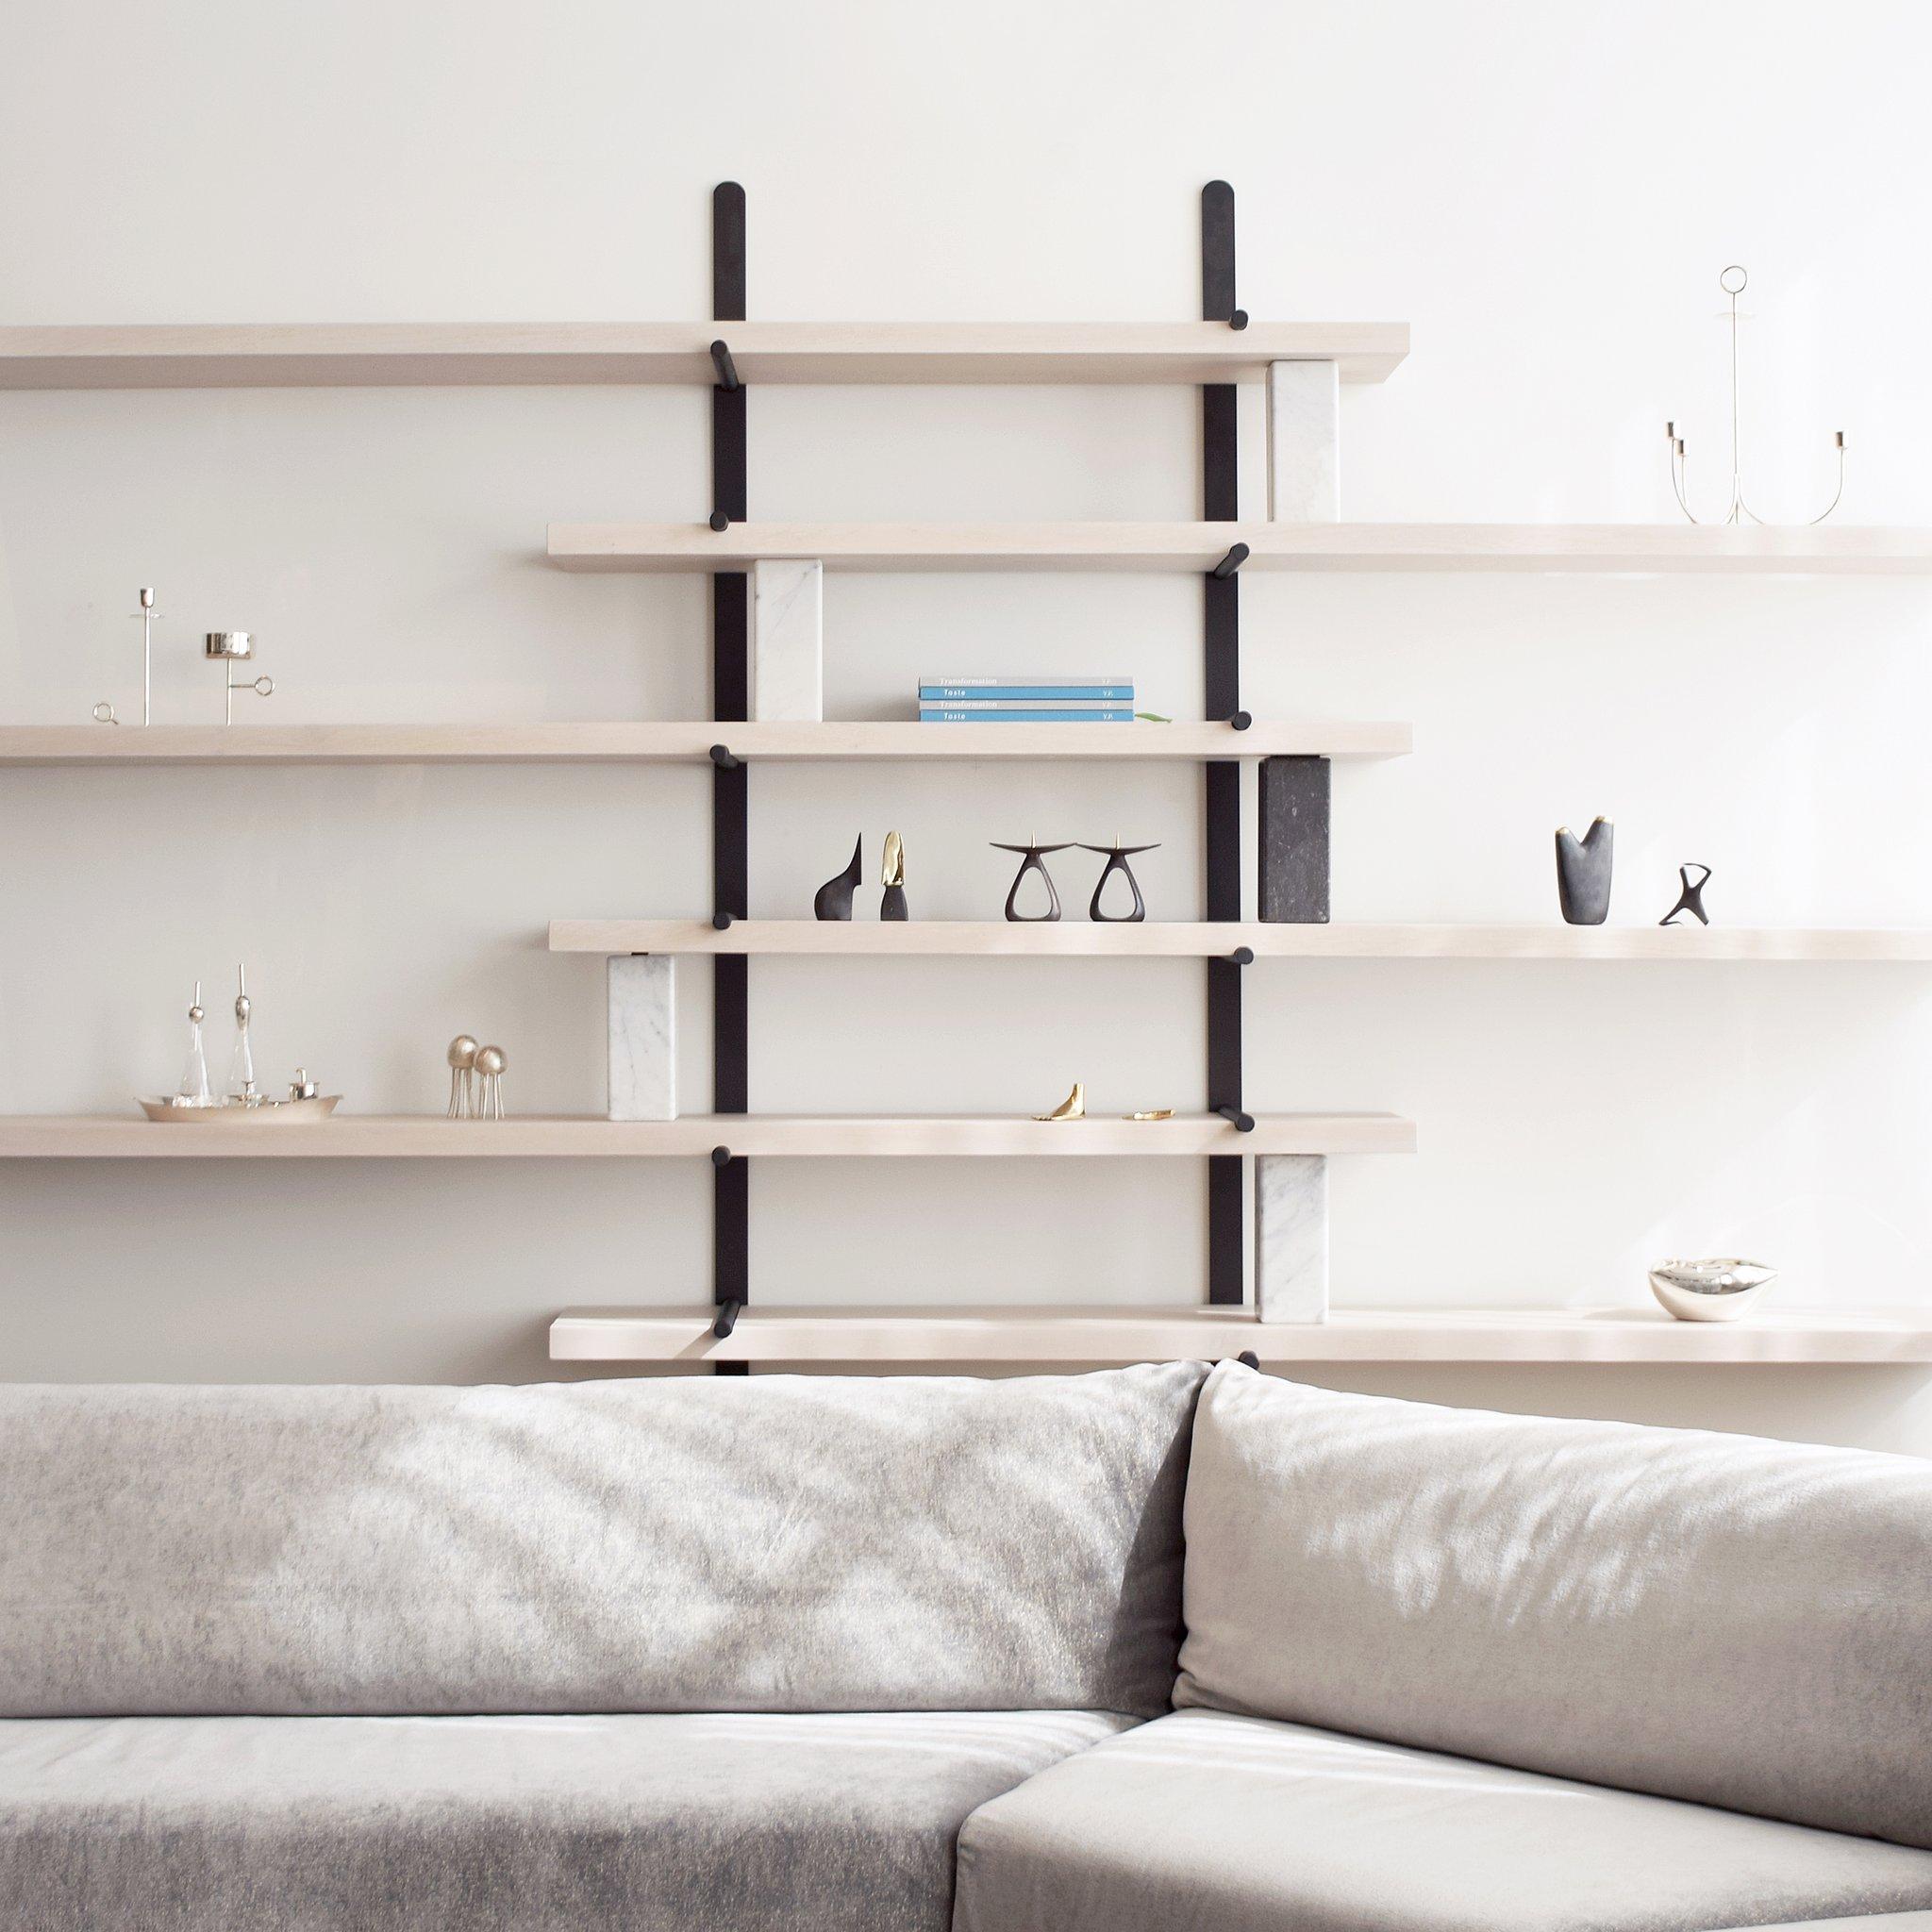 Ladder Street Shelving by Yabu Pushelberg in Black Stained Oak and Bluestone In New Condition For Sale In Toronto, ON